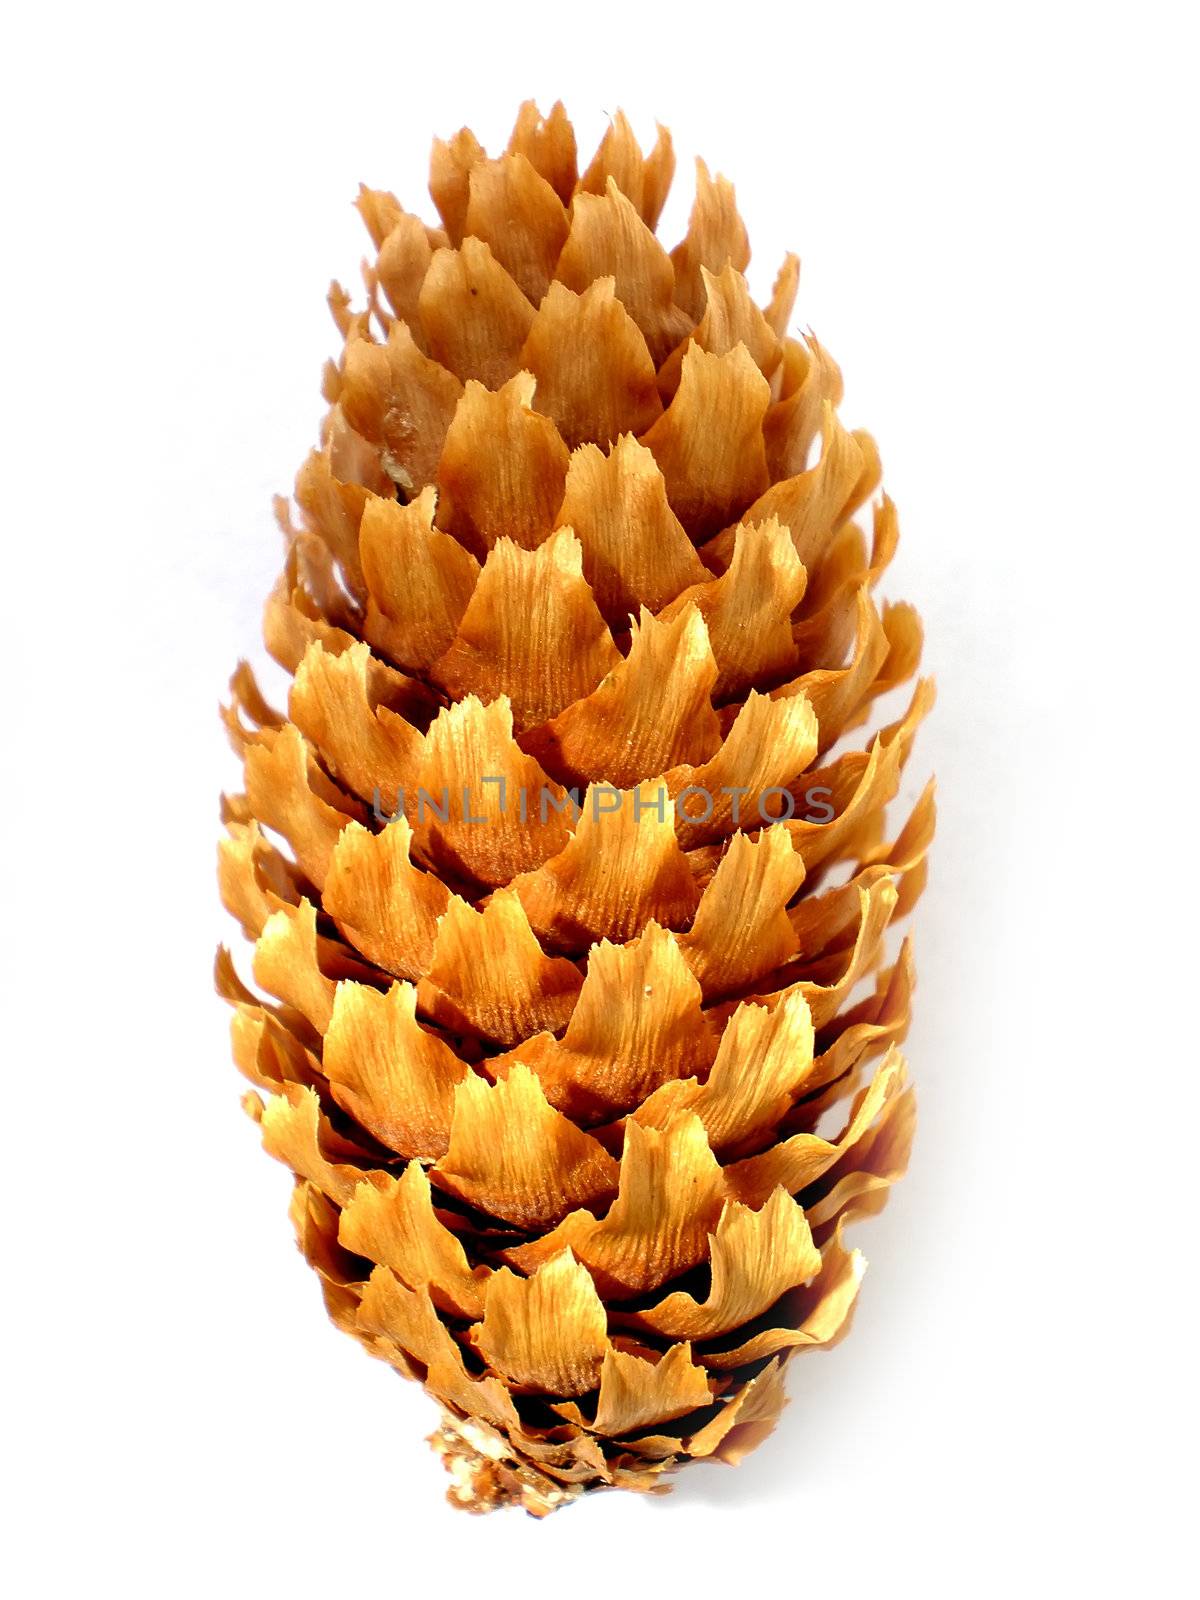 pine cone isolated on white background by Dessie_bg